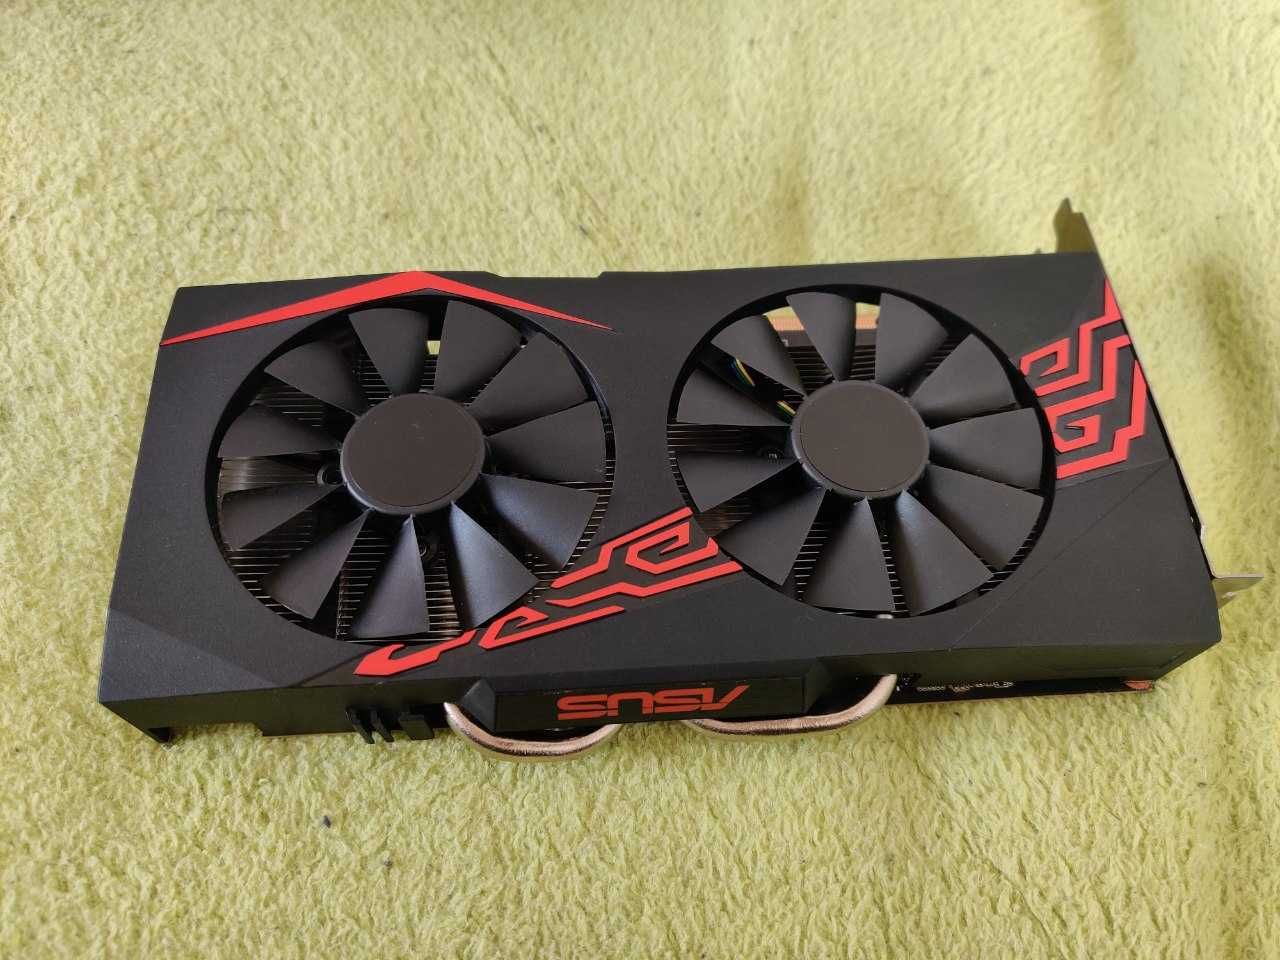 Asus GTX 1060 6gb Expedition